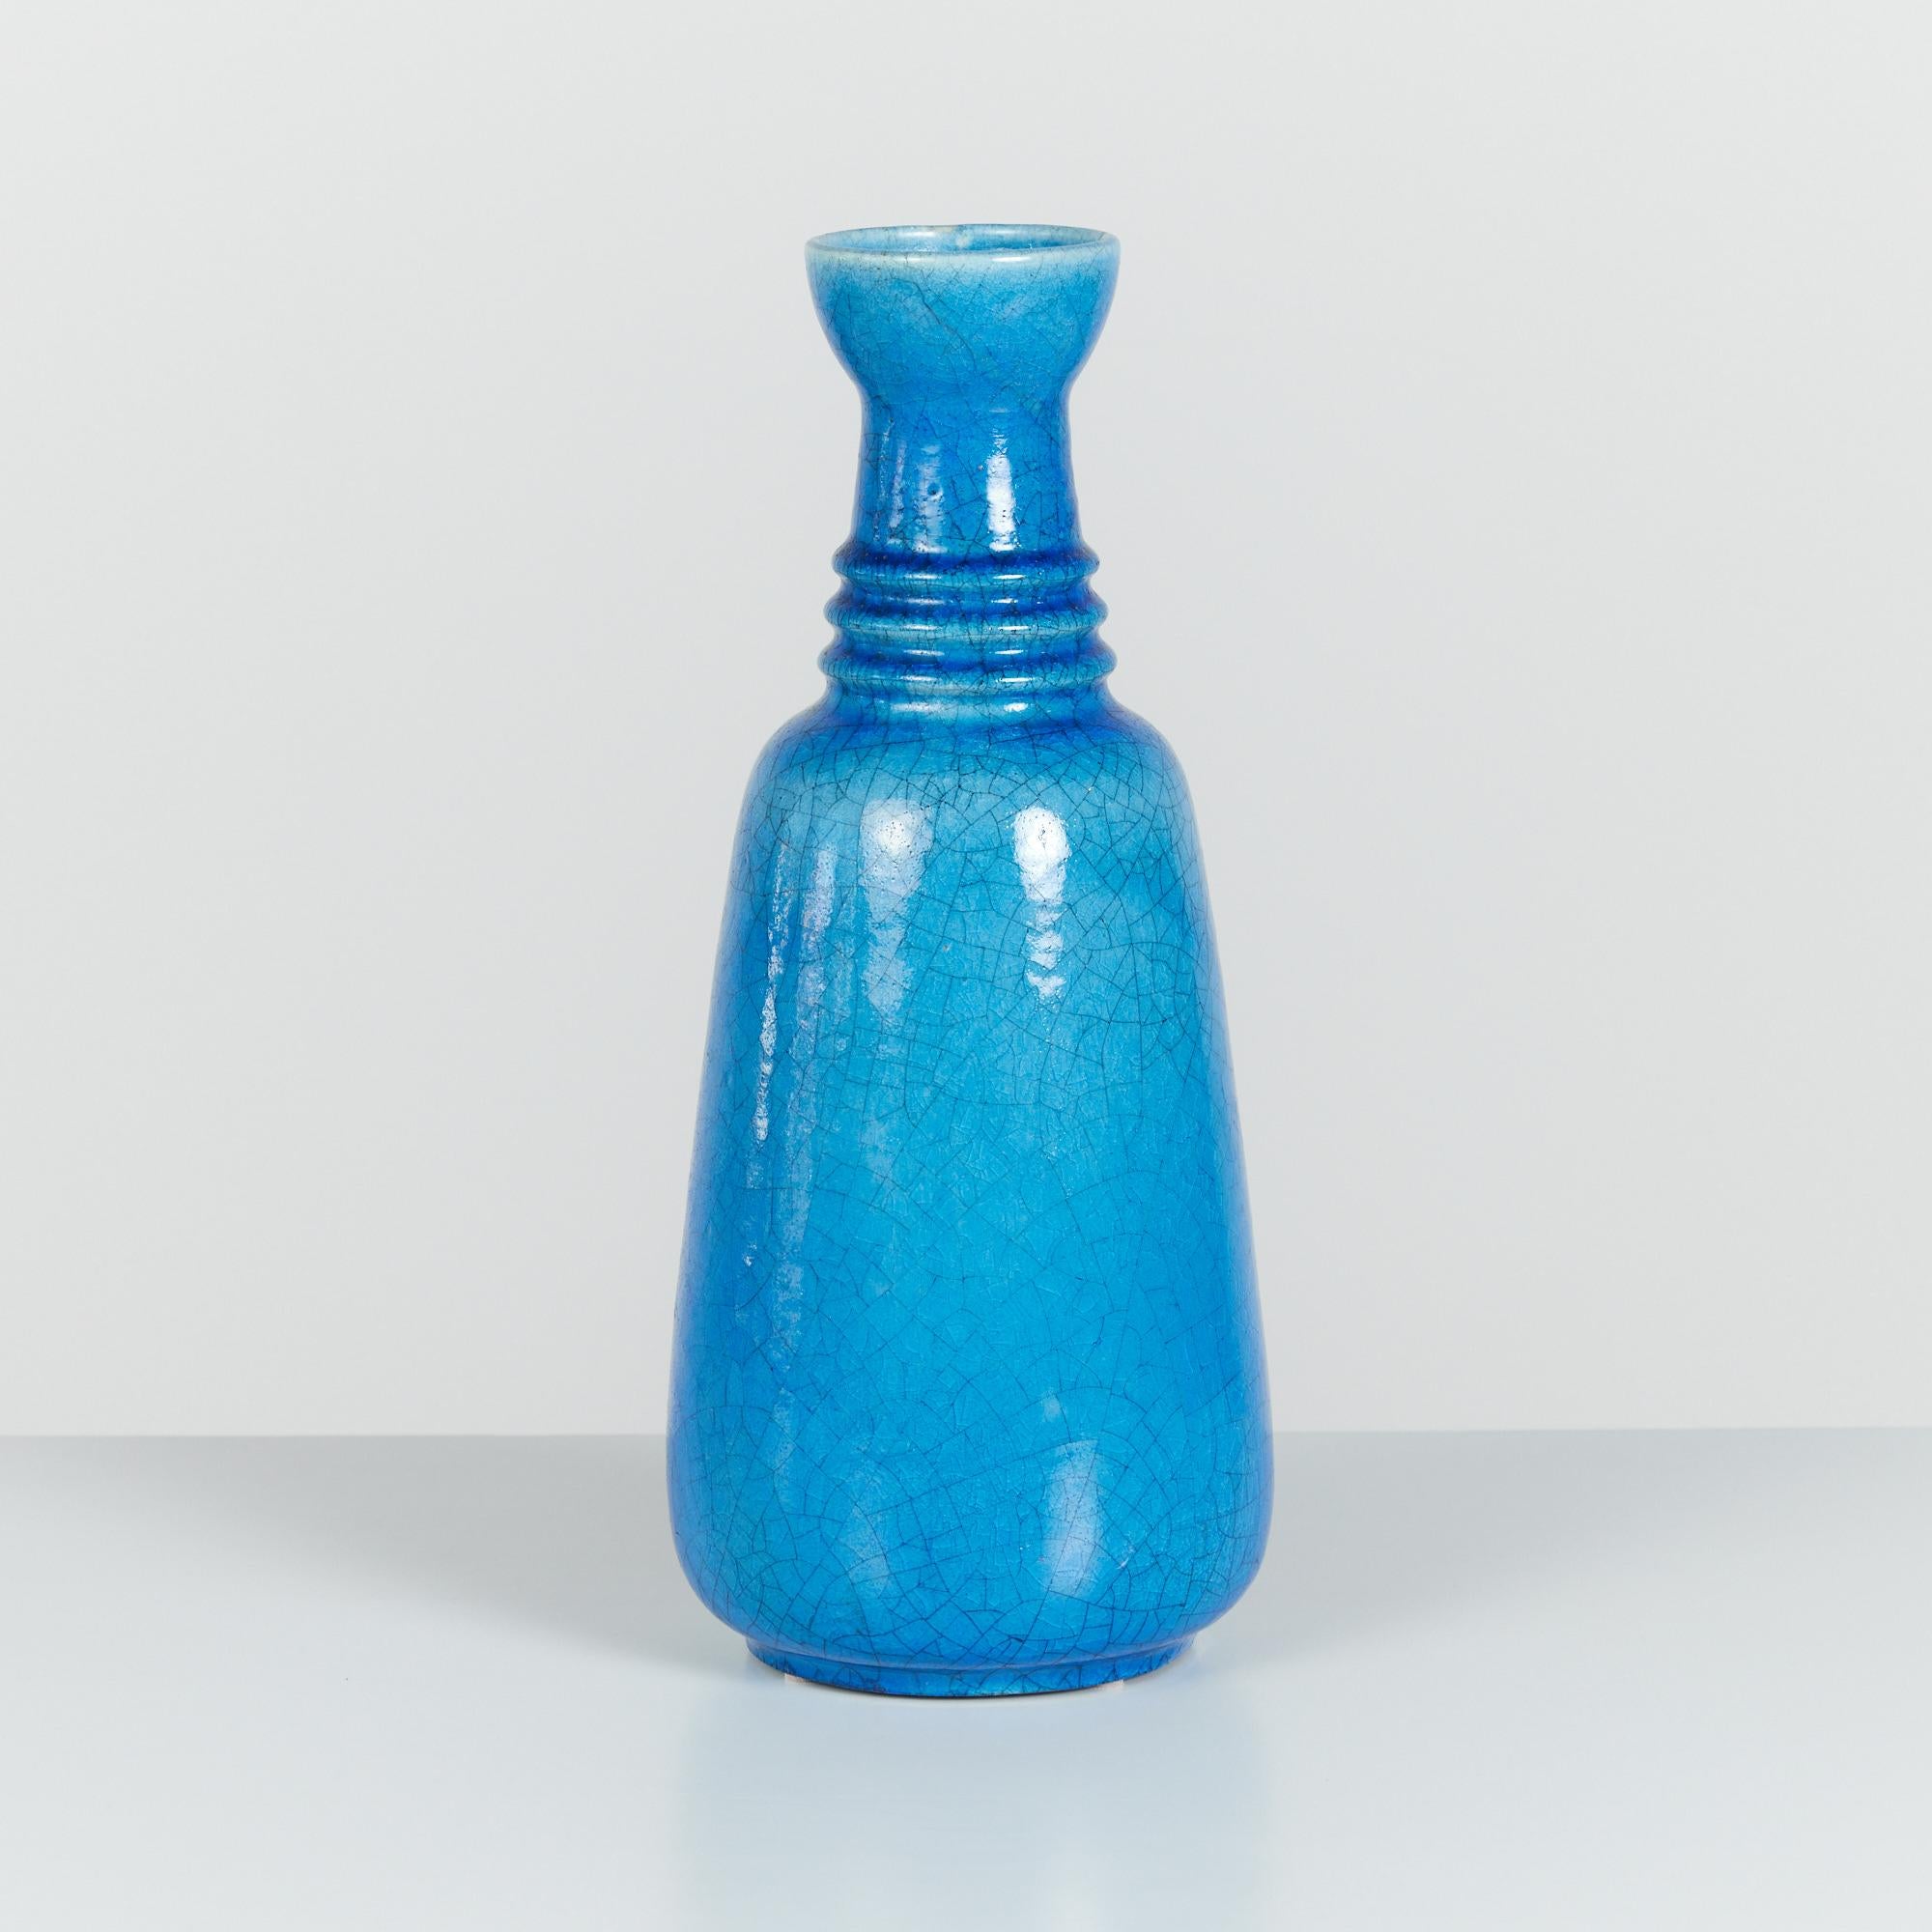 Arnold Zahner Large Scale Blue Glazed Ceramic Vase In Excellent Condition For Sale In Los Angeles, CA